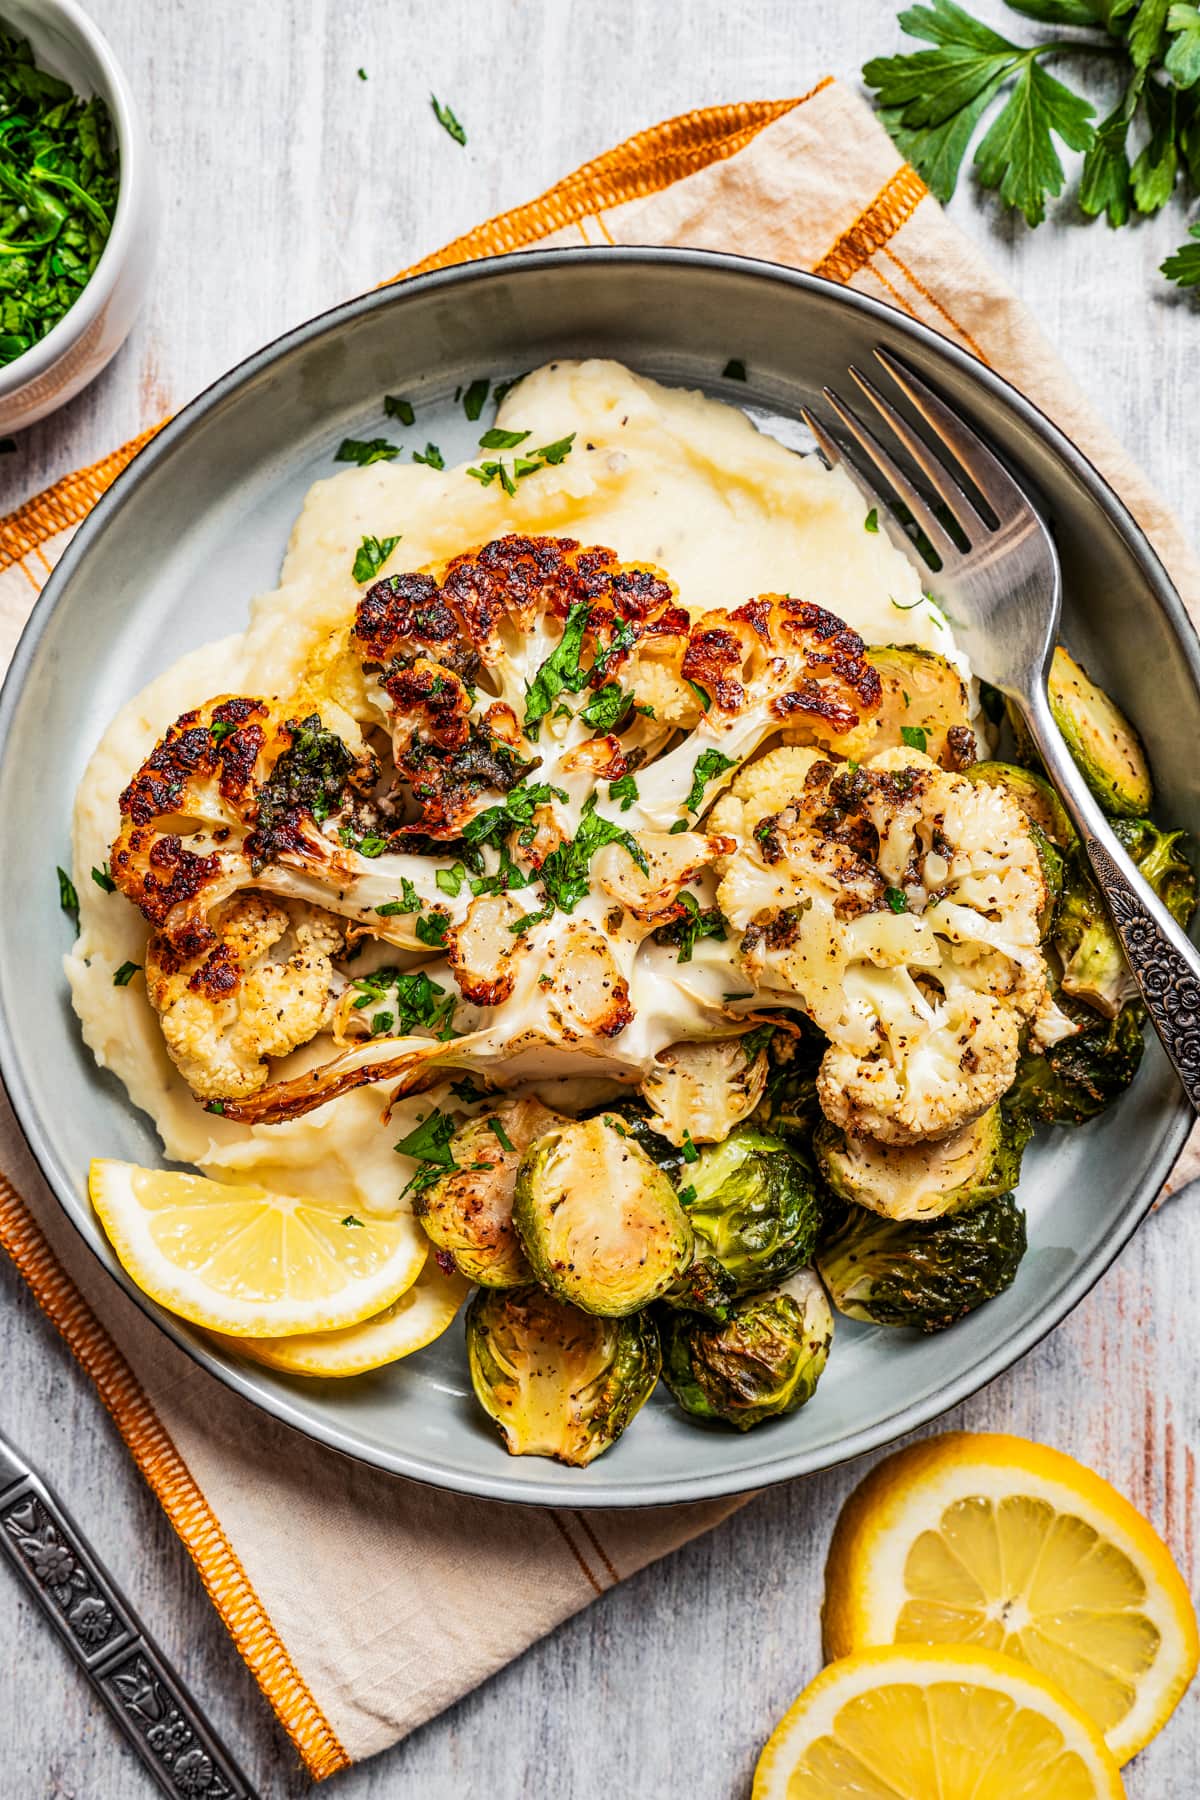 Roasted cauliflower steak served on a plate over mashed potatoes with brussels sprouts.